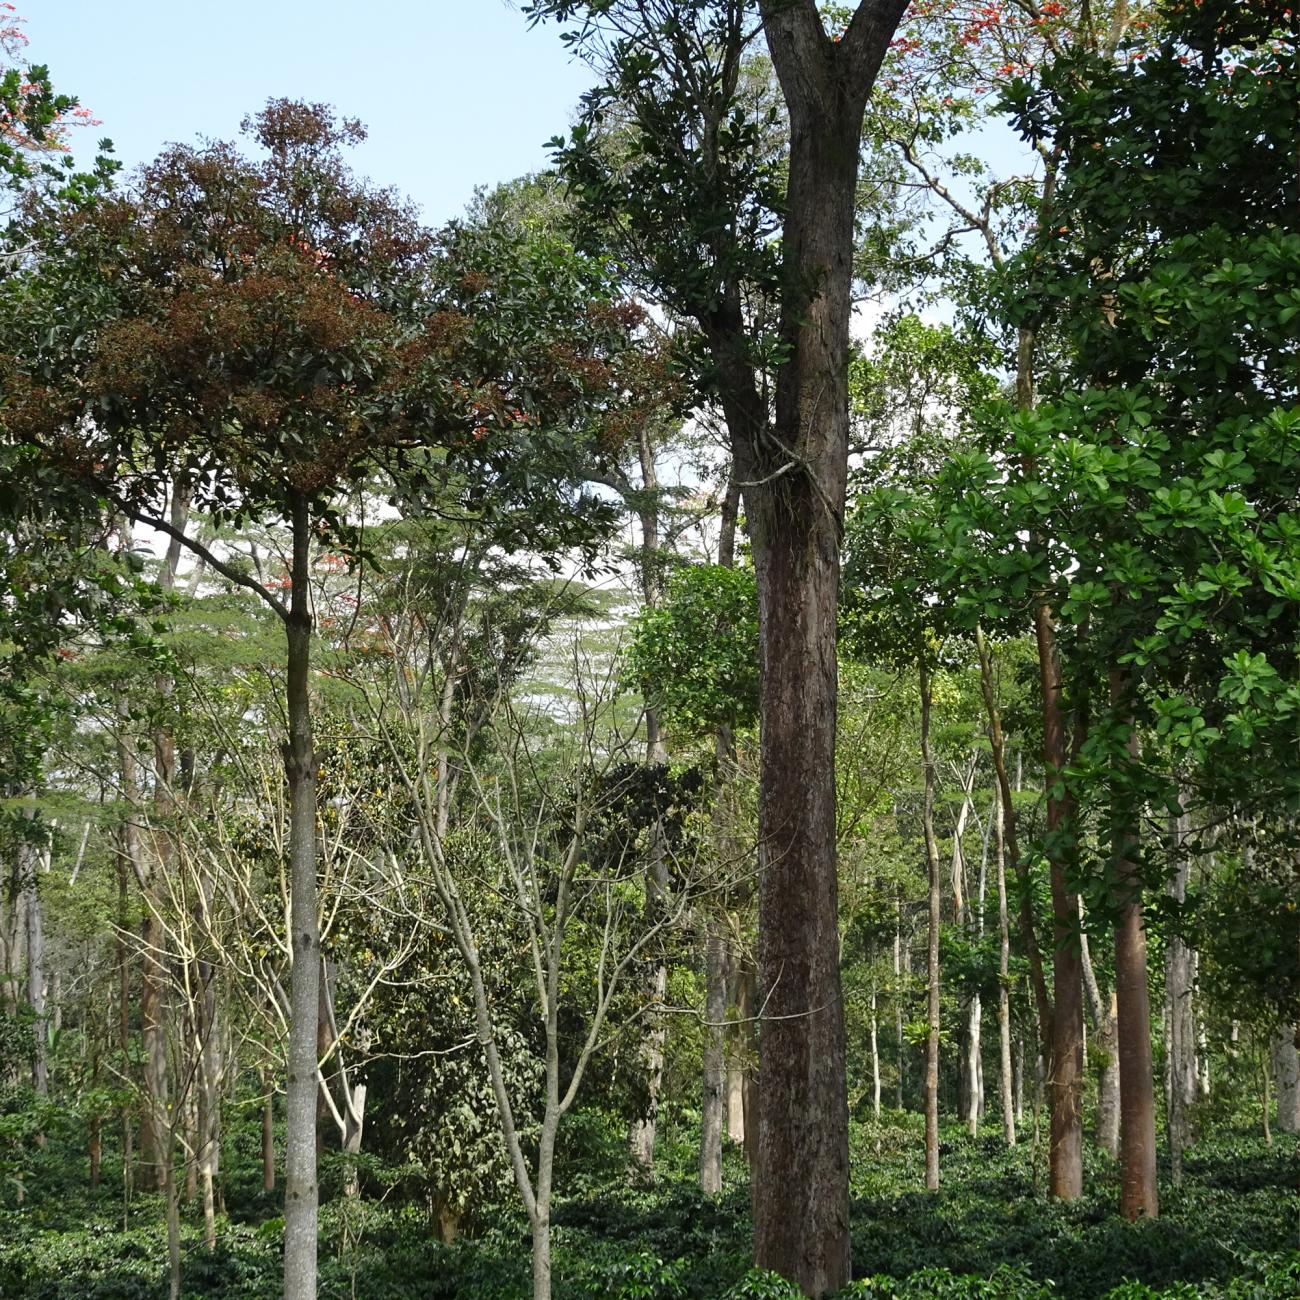 A bird friendly coffee farm with trees of various height that provide shade cover and habitat.